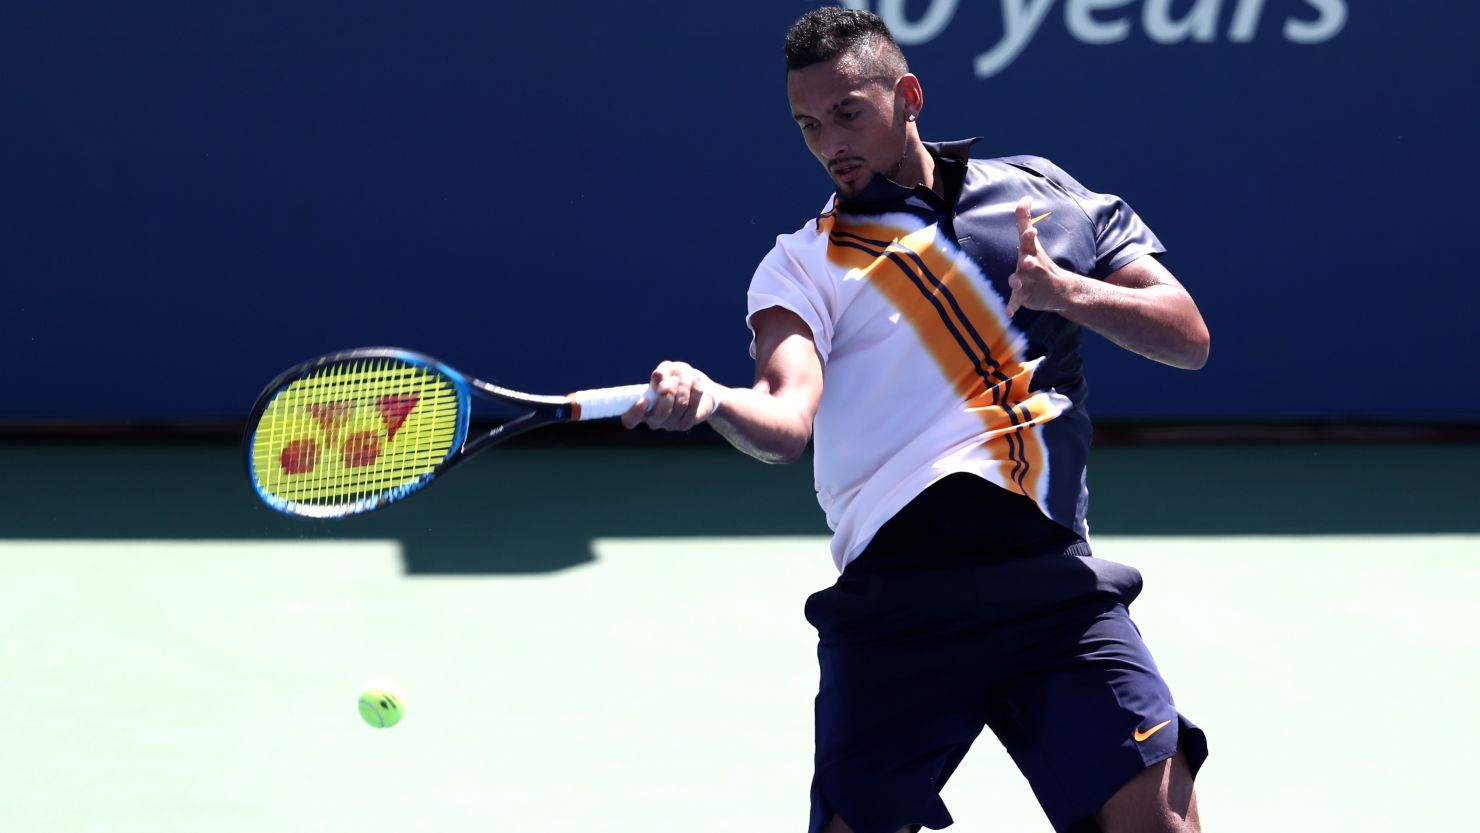 After the sexism row at the US Open, there is controversy surrounding Nick Kyrgios' win over Pierre-Hugues Herbert.